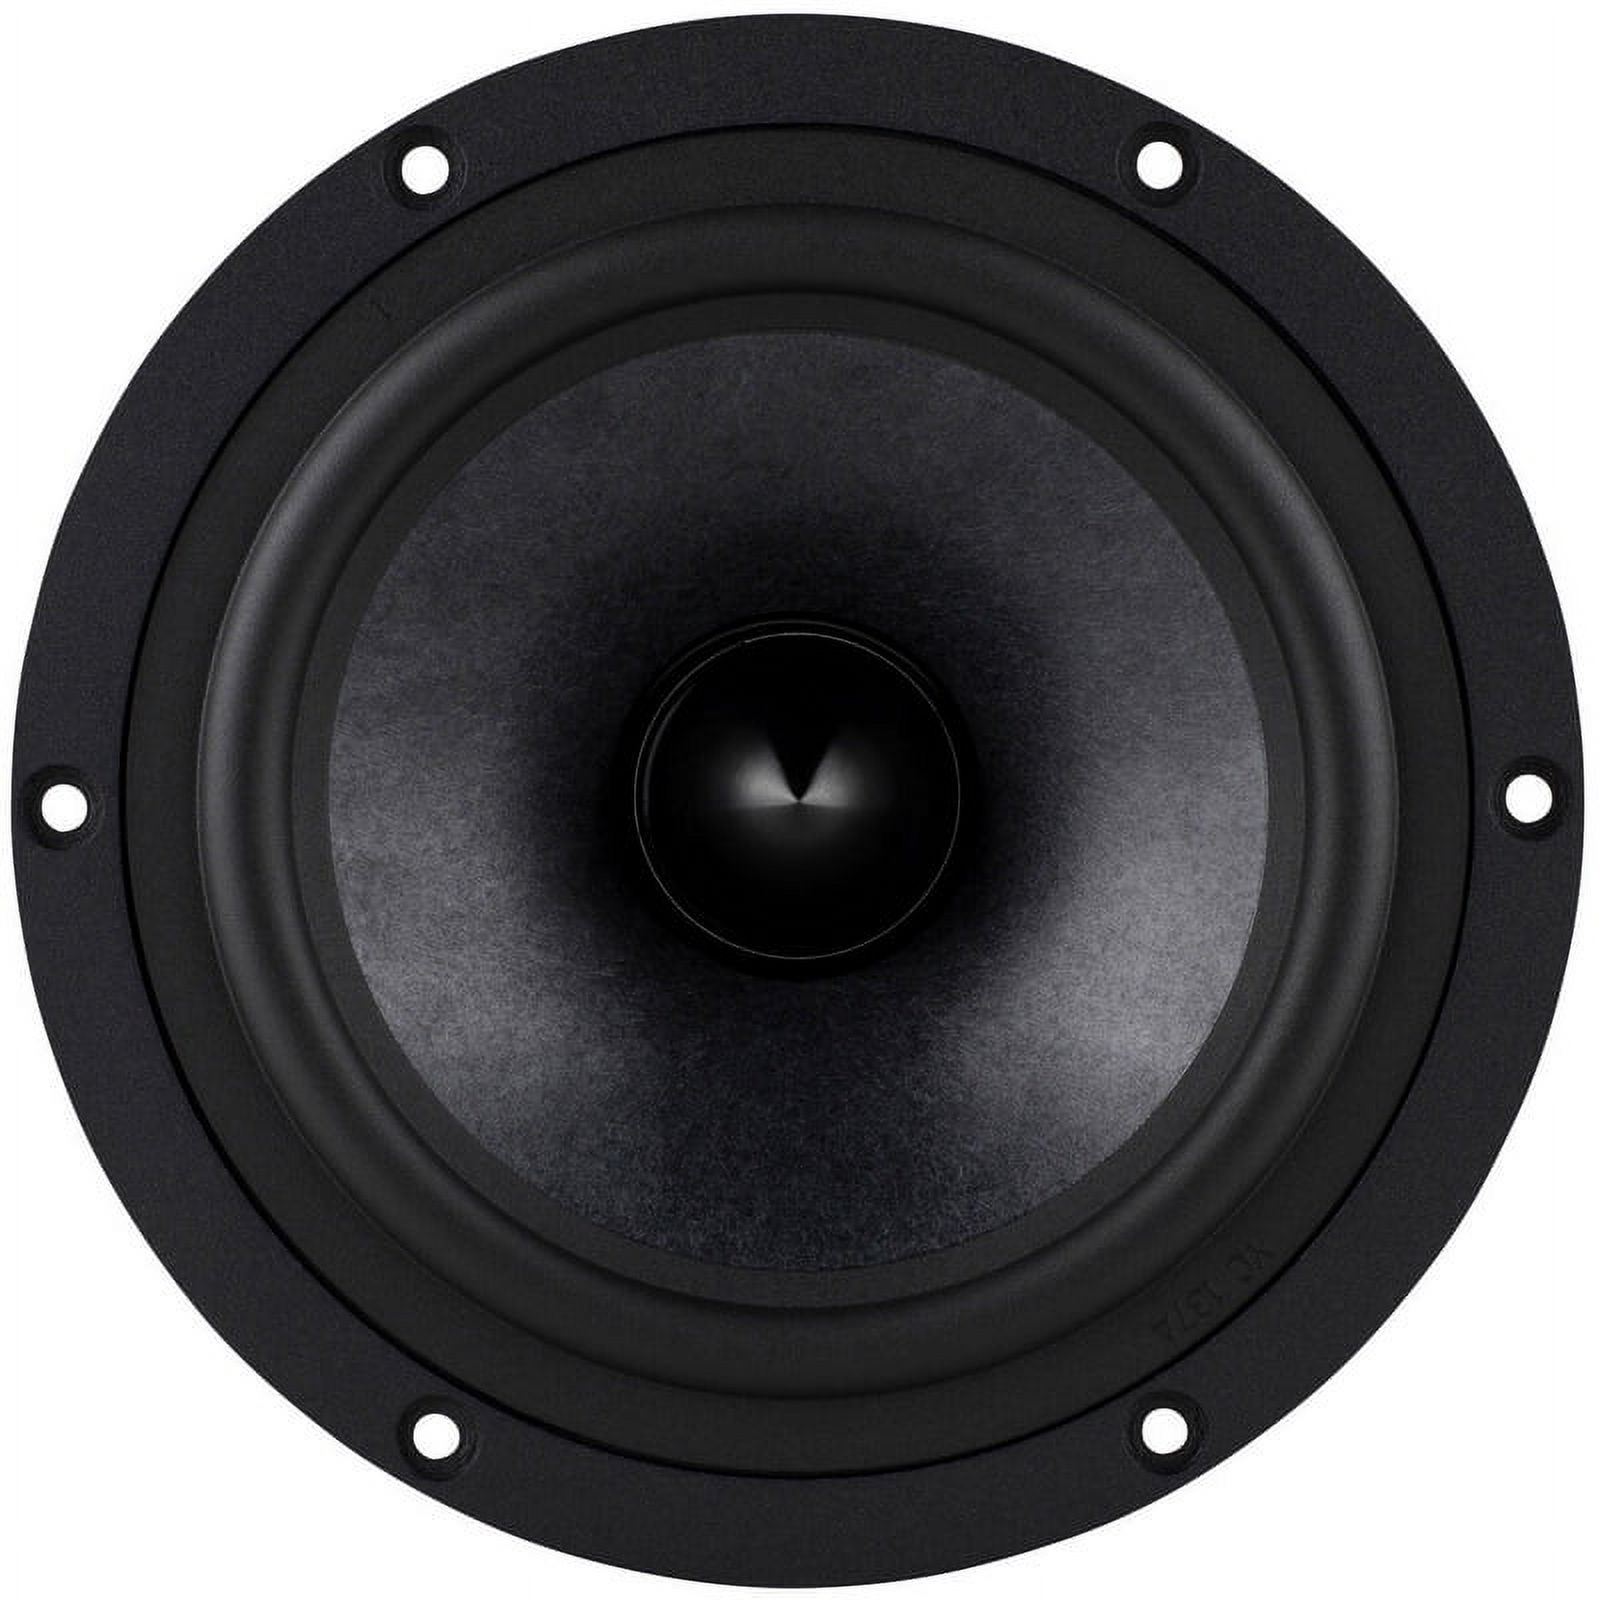 Dayton Audio RS180P-8 7" Reference Paper Woofer 8 Ohm - image 3 of 3